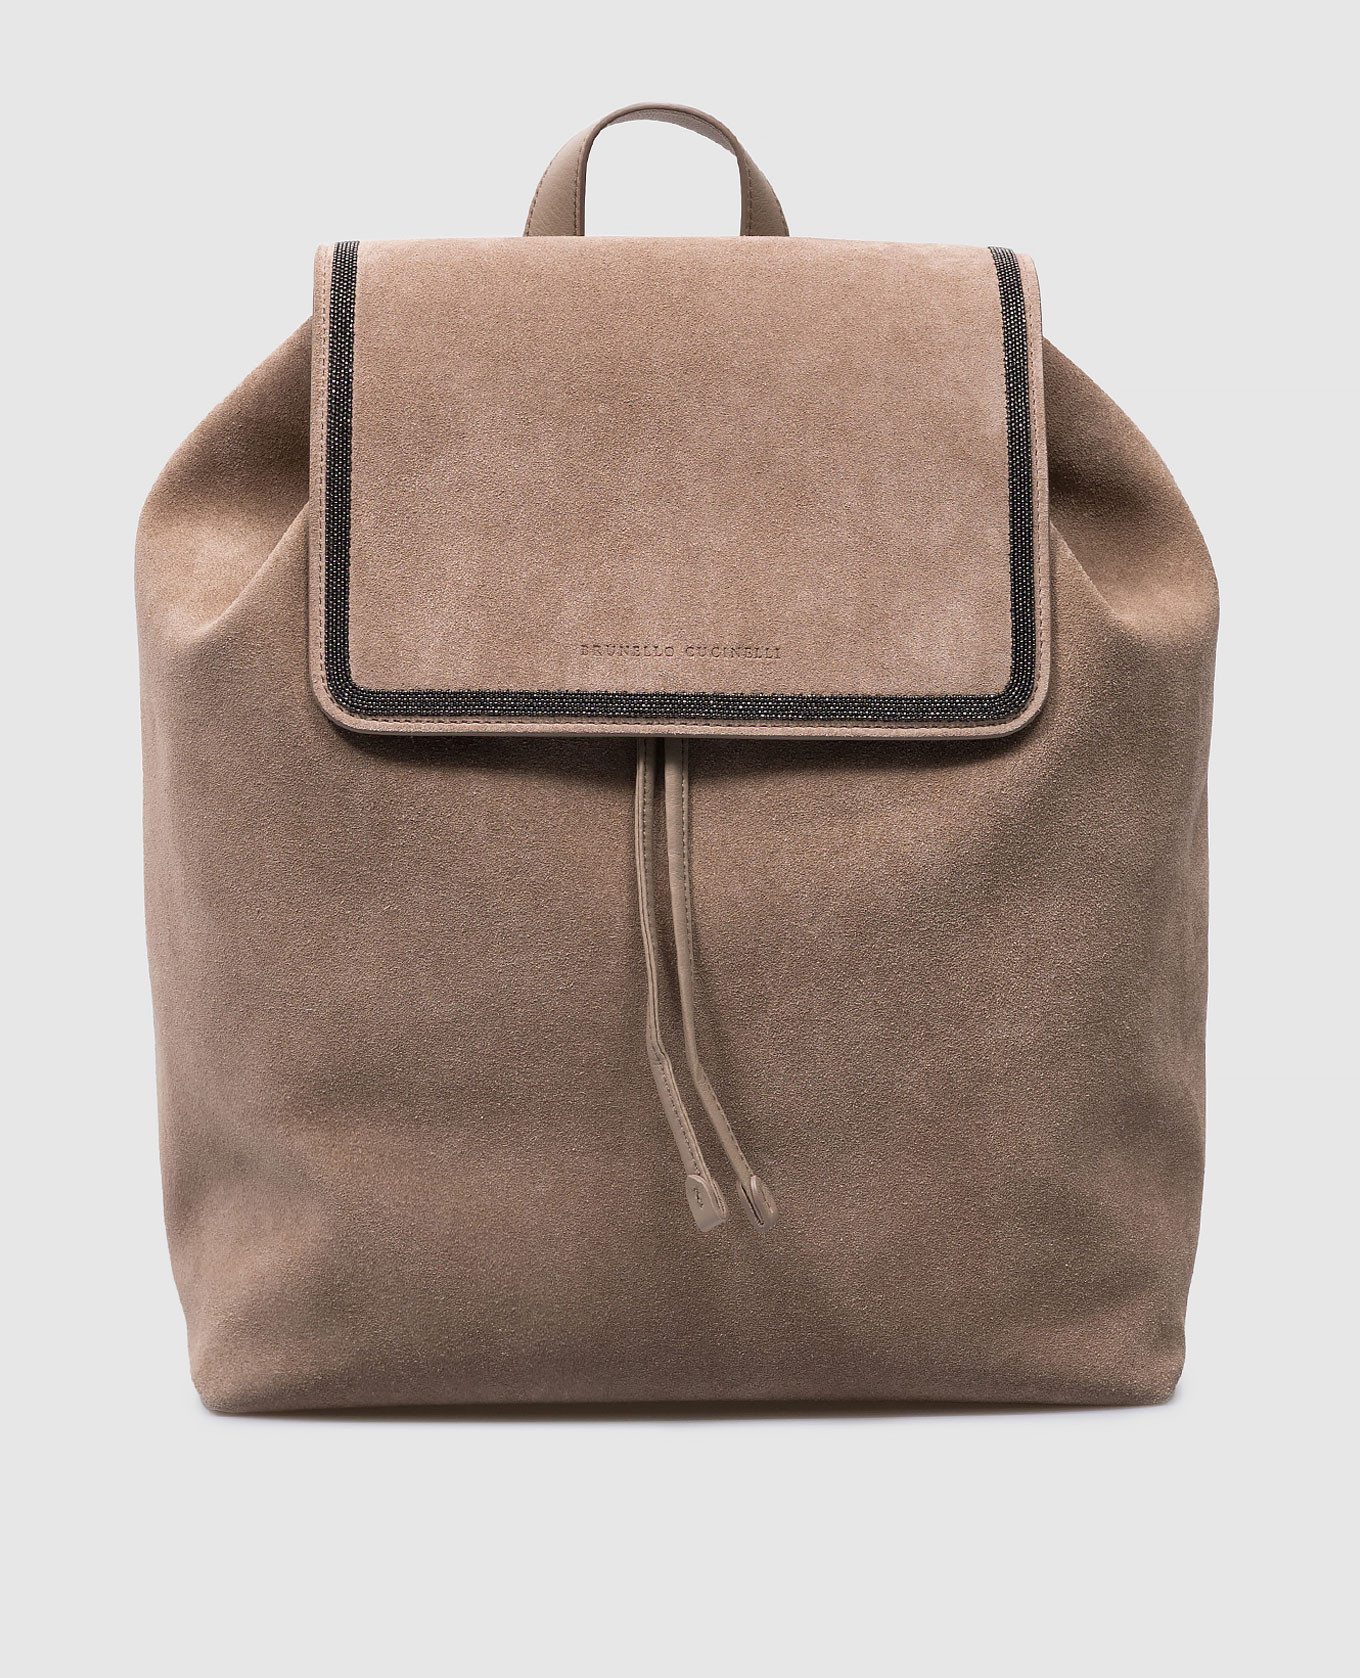 Beige suede backpack with monil chain